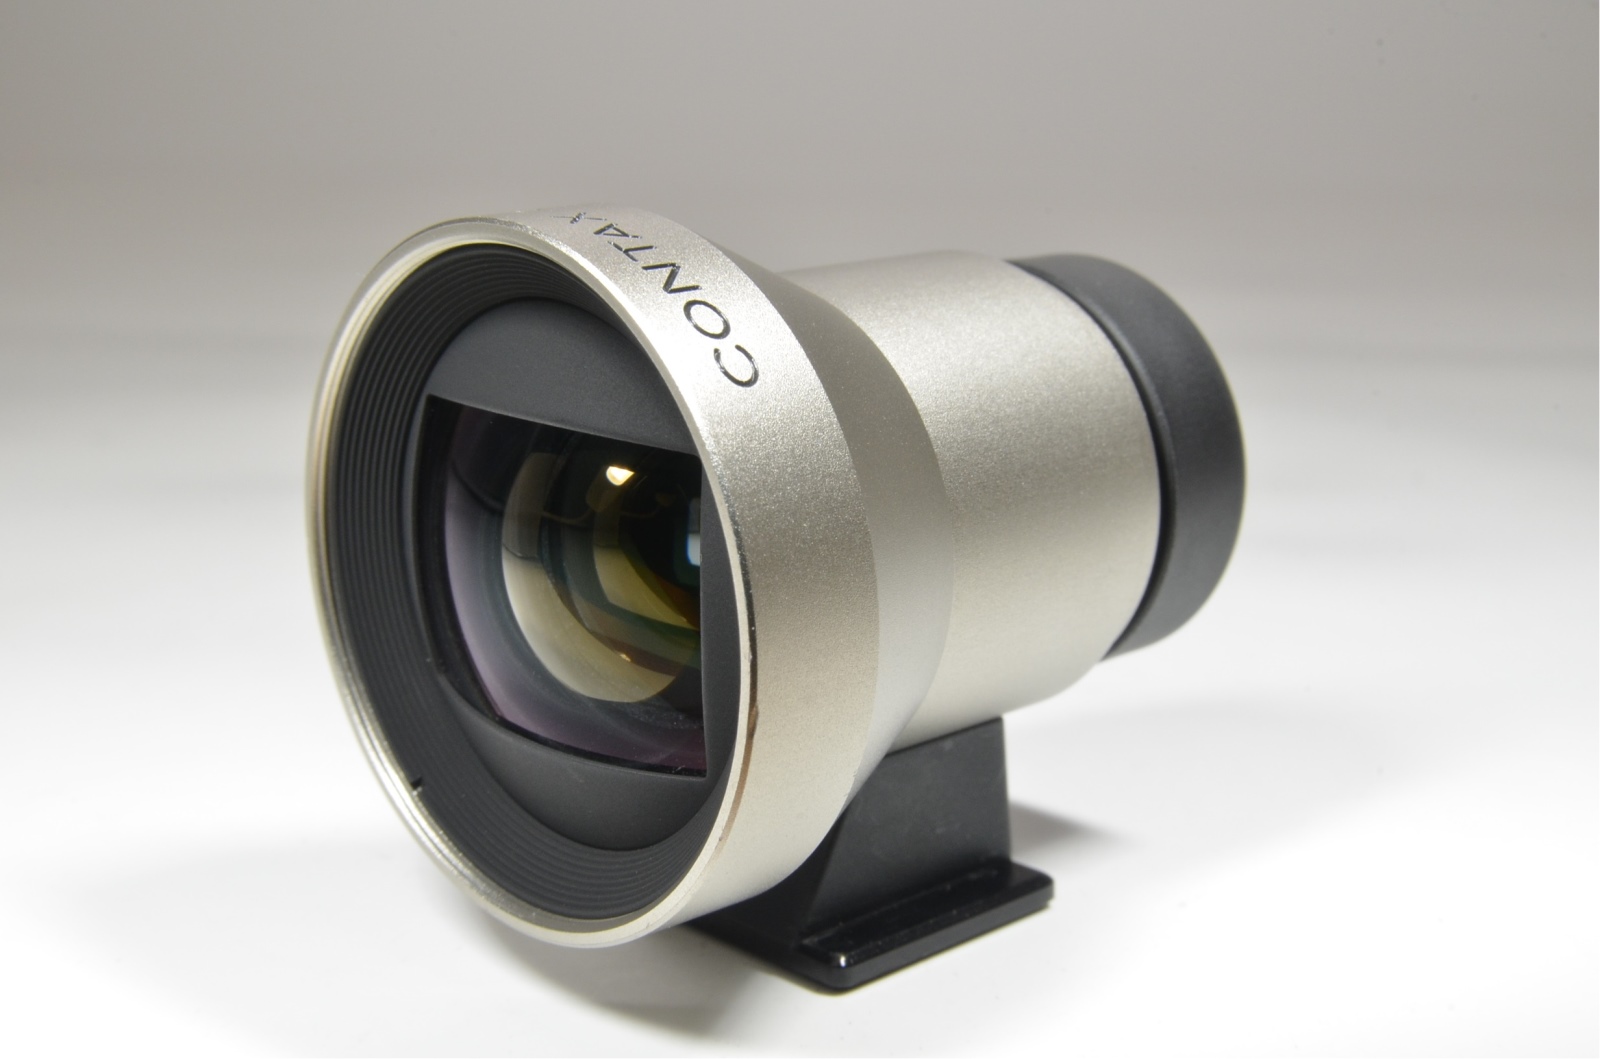 contax carl zeiss t* biogon 21mm f2.8 lens with view finder for g1 g2